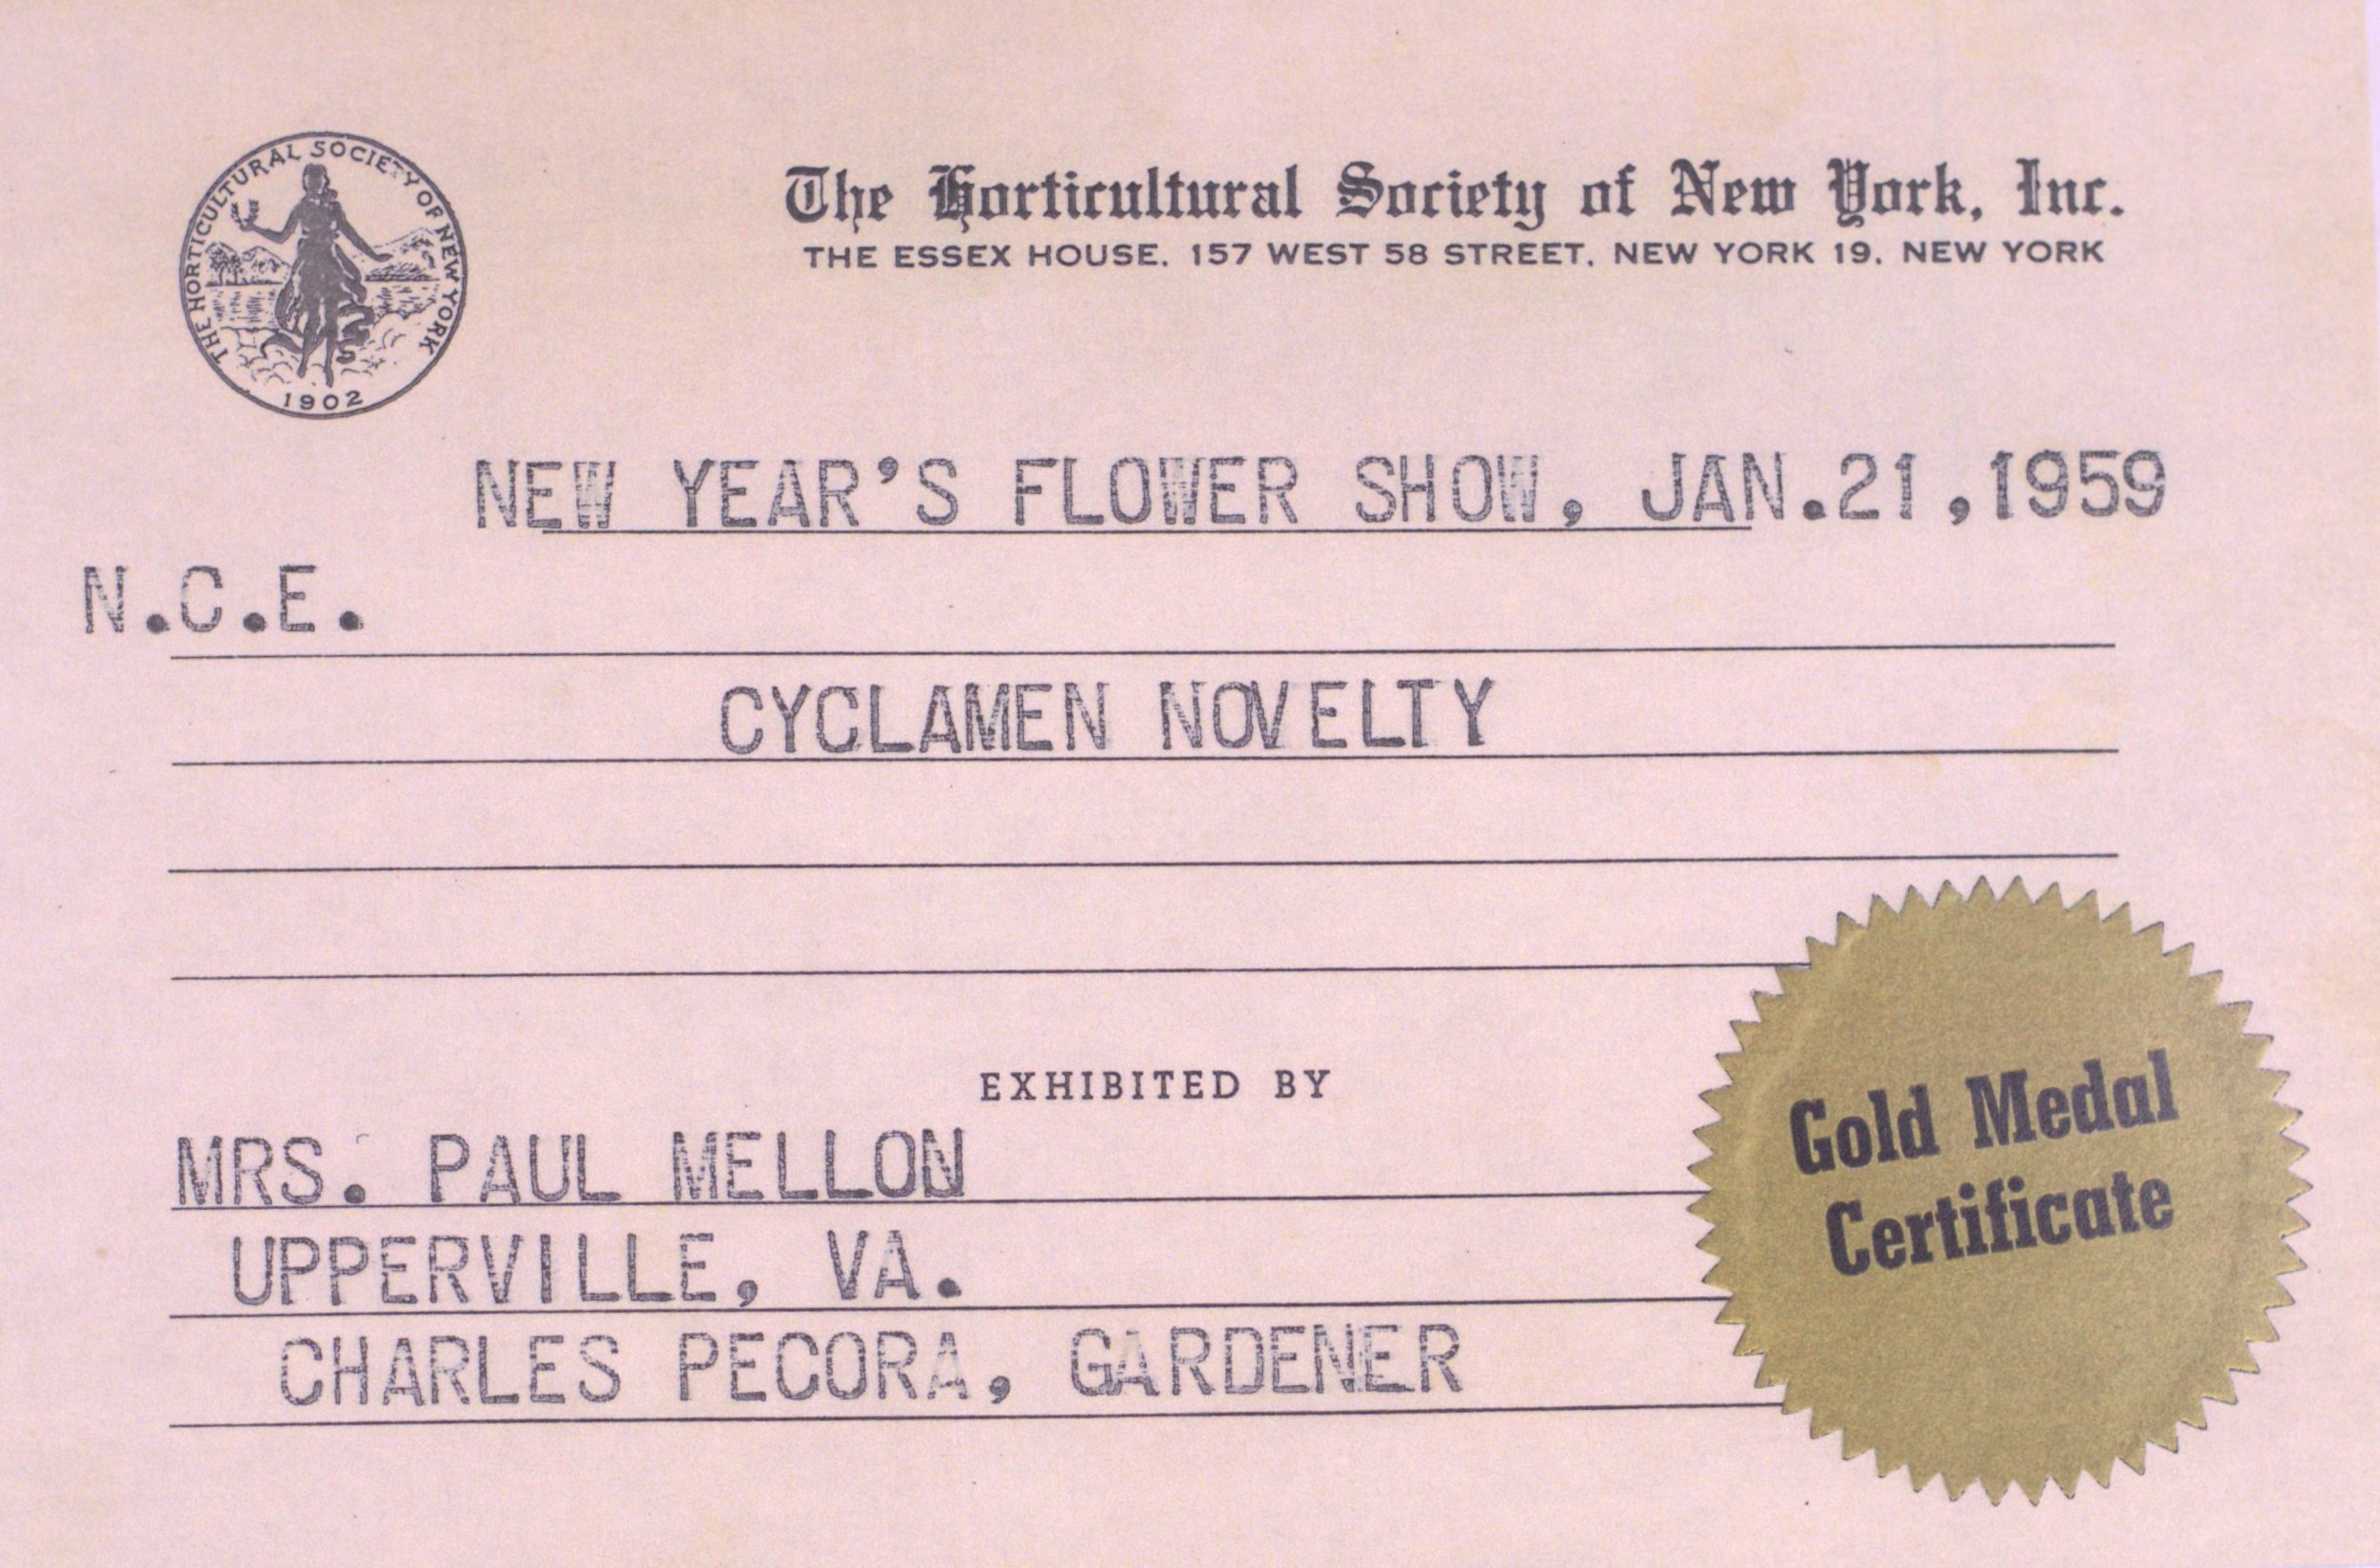  Gold Medal Certificate received by Bunny Mellon for her entry into the New York Flower Show in 1959. 